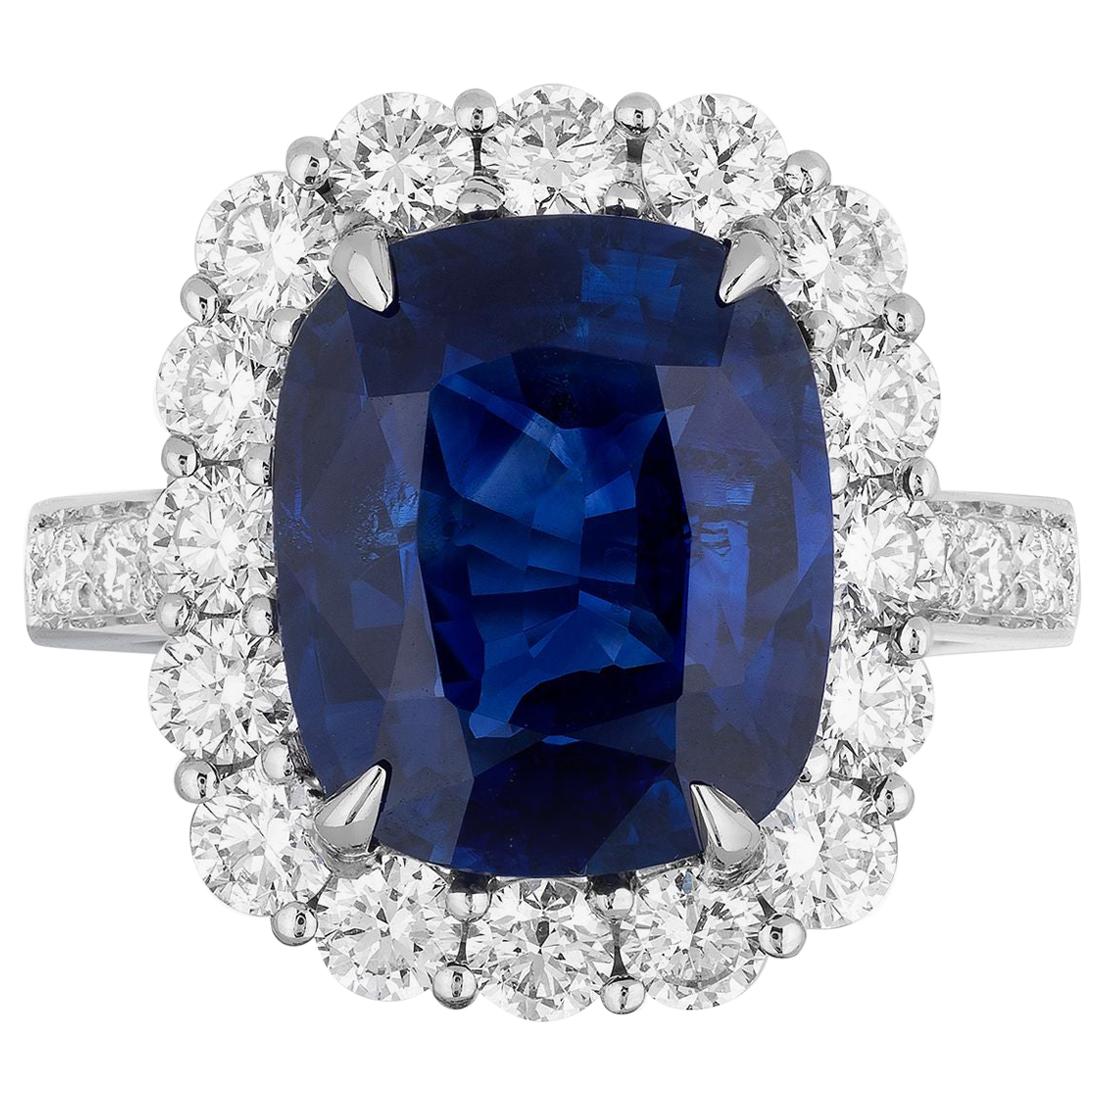 CDC Certified 7.59 Carat Cushion Shape Blue Sapphire Diamond Cocktail Ring For Sale